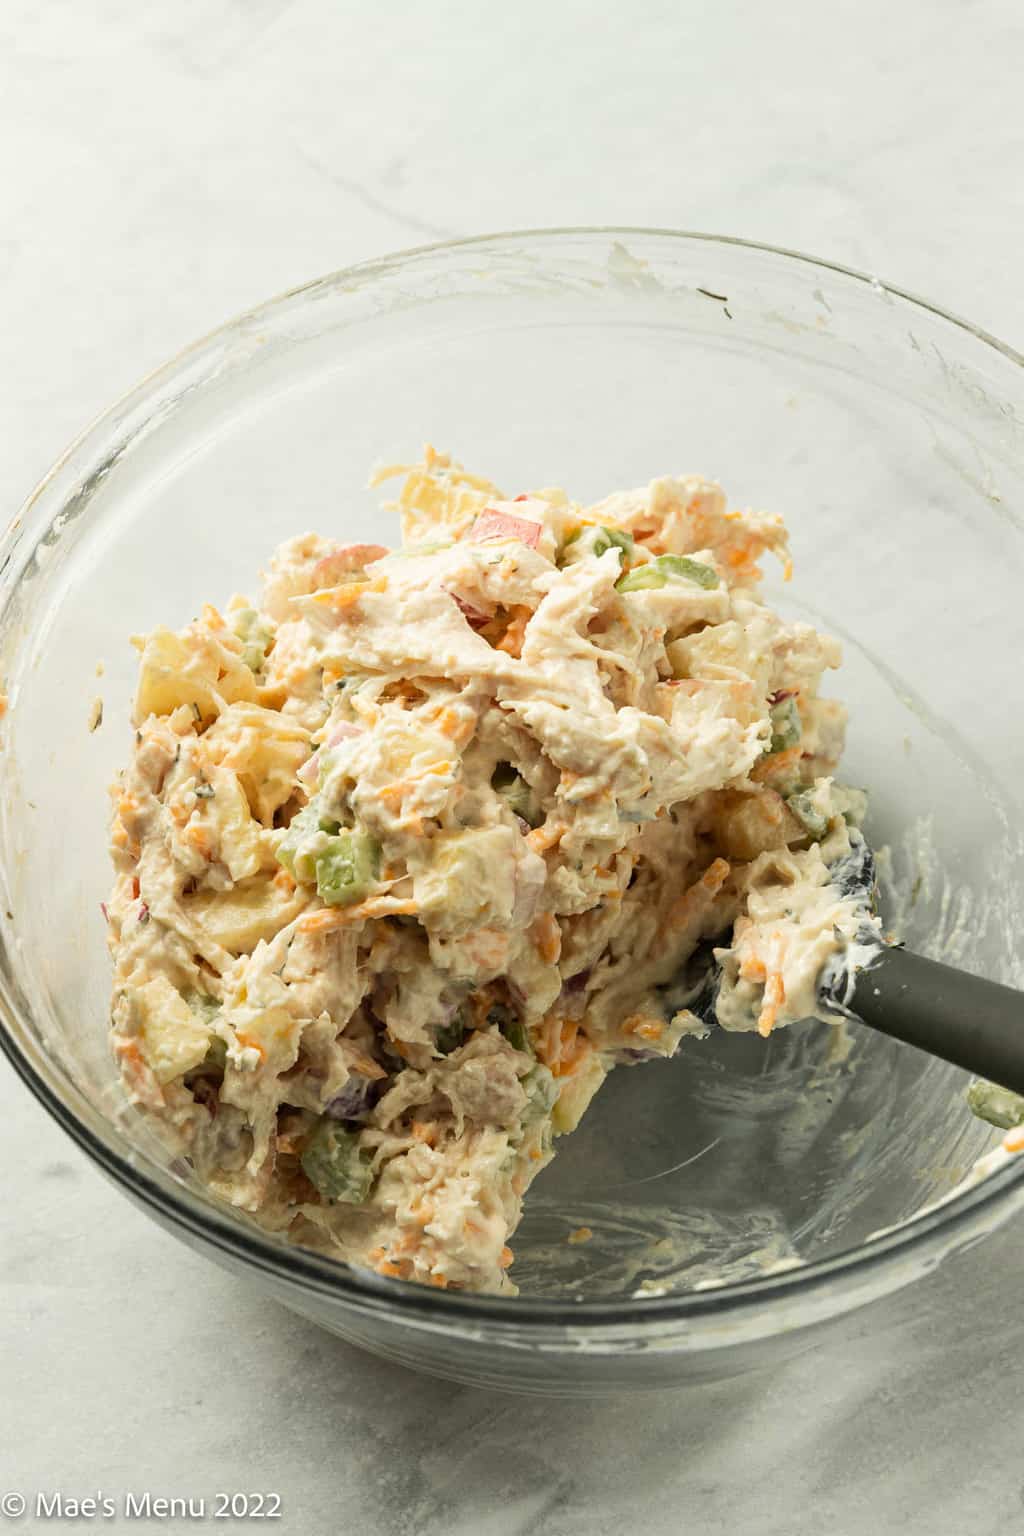 An angled shot of a large glass mixing bowl with chicken salad and a silicone spatula in it.